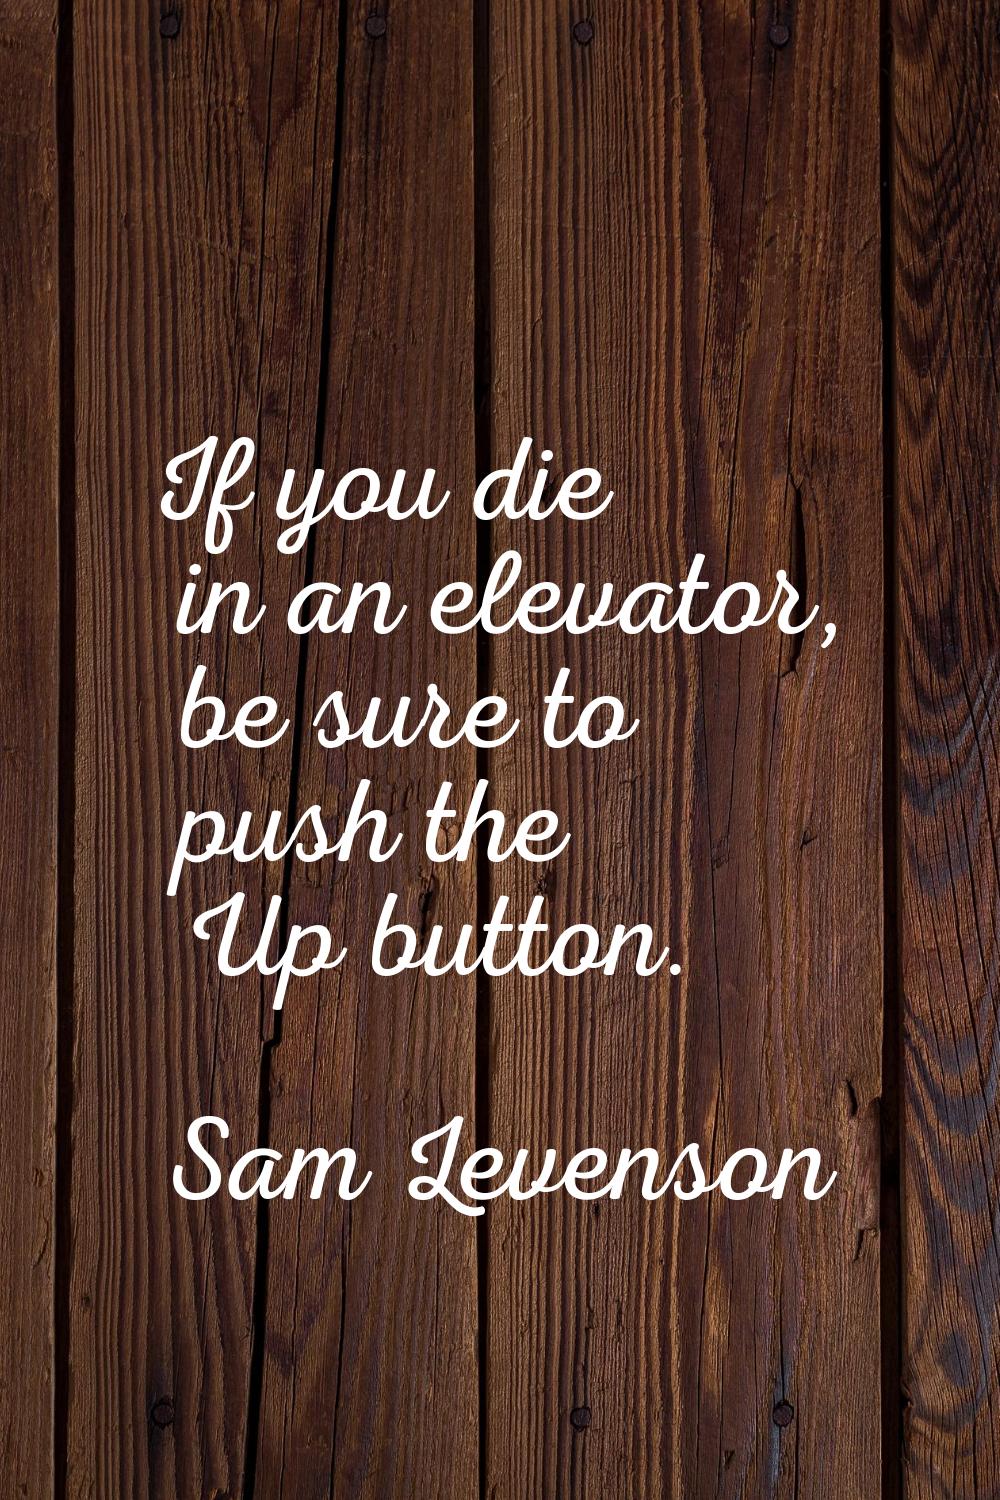 If you die in an elevator, be sure to push the Up button.